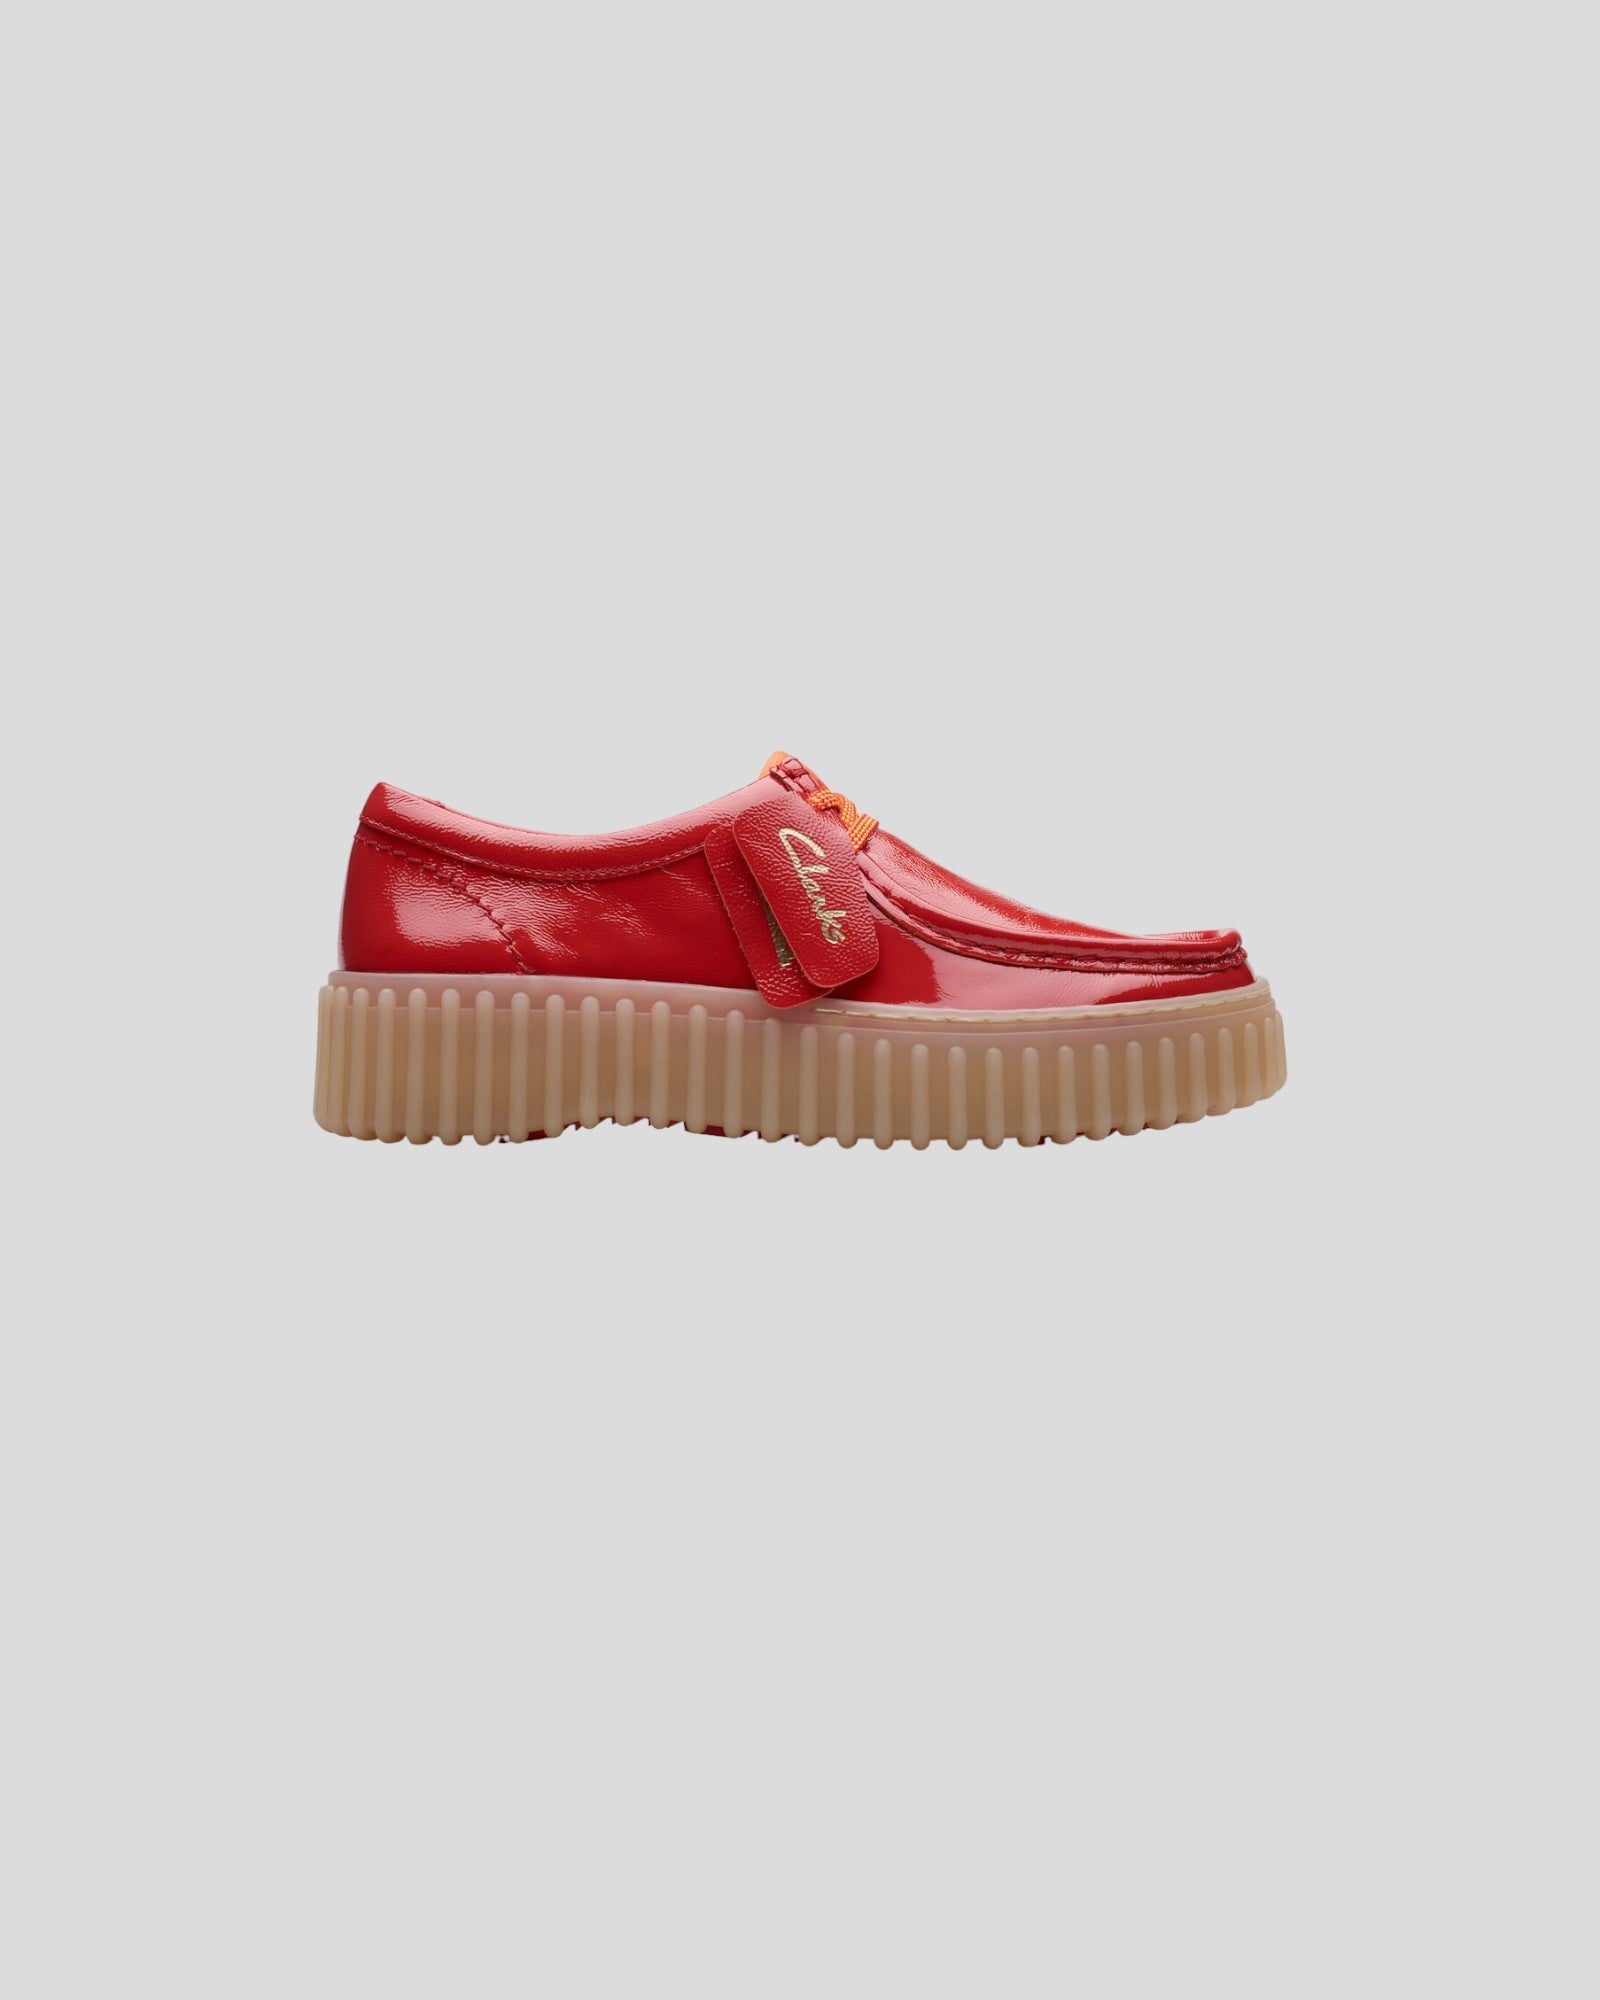 Clarks || Torhill Bee - Red Patent